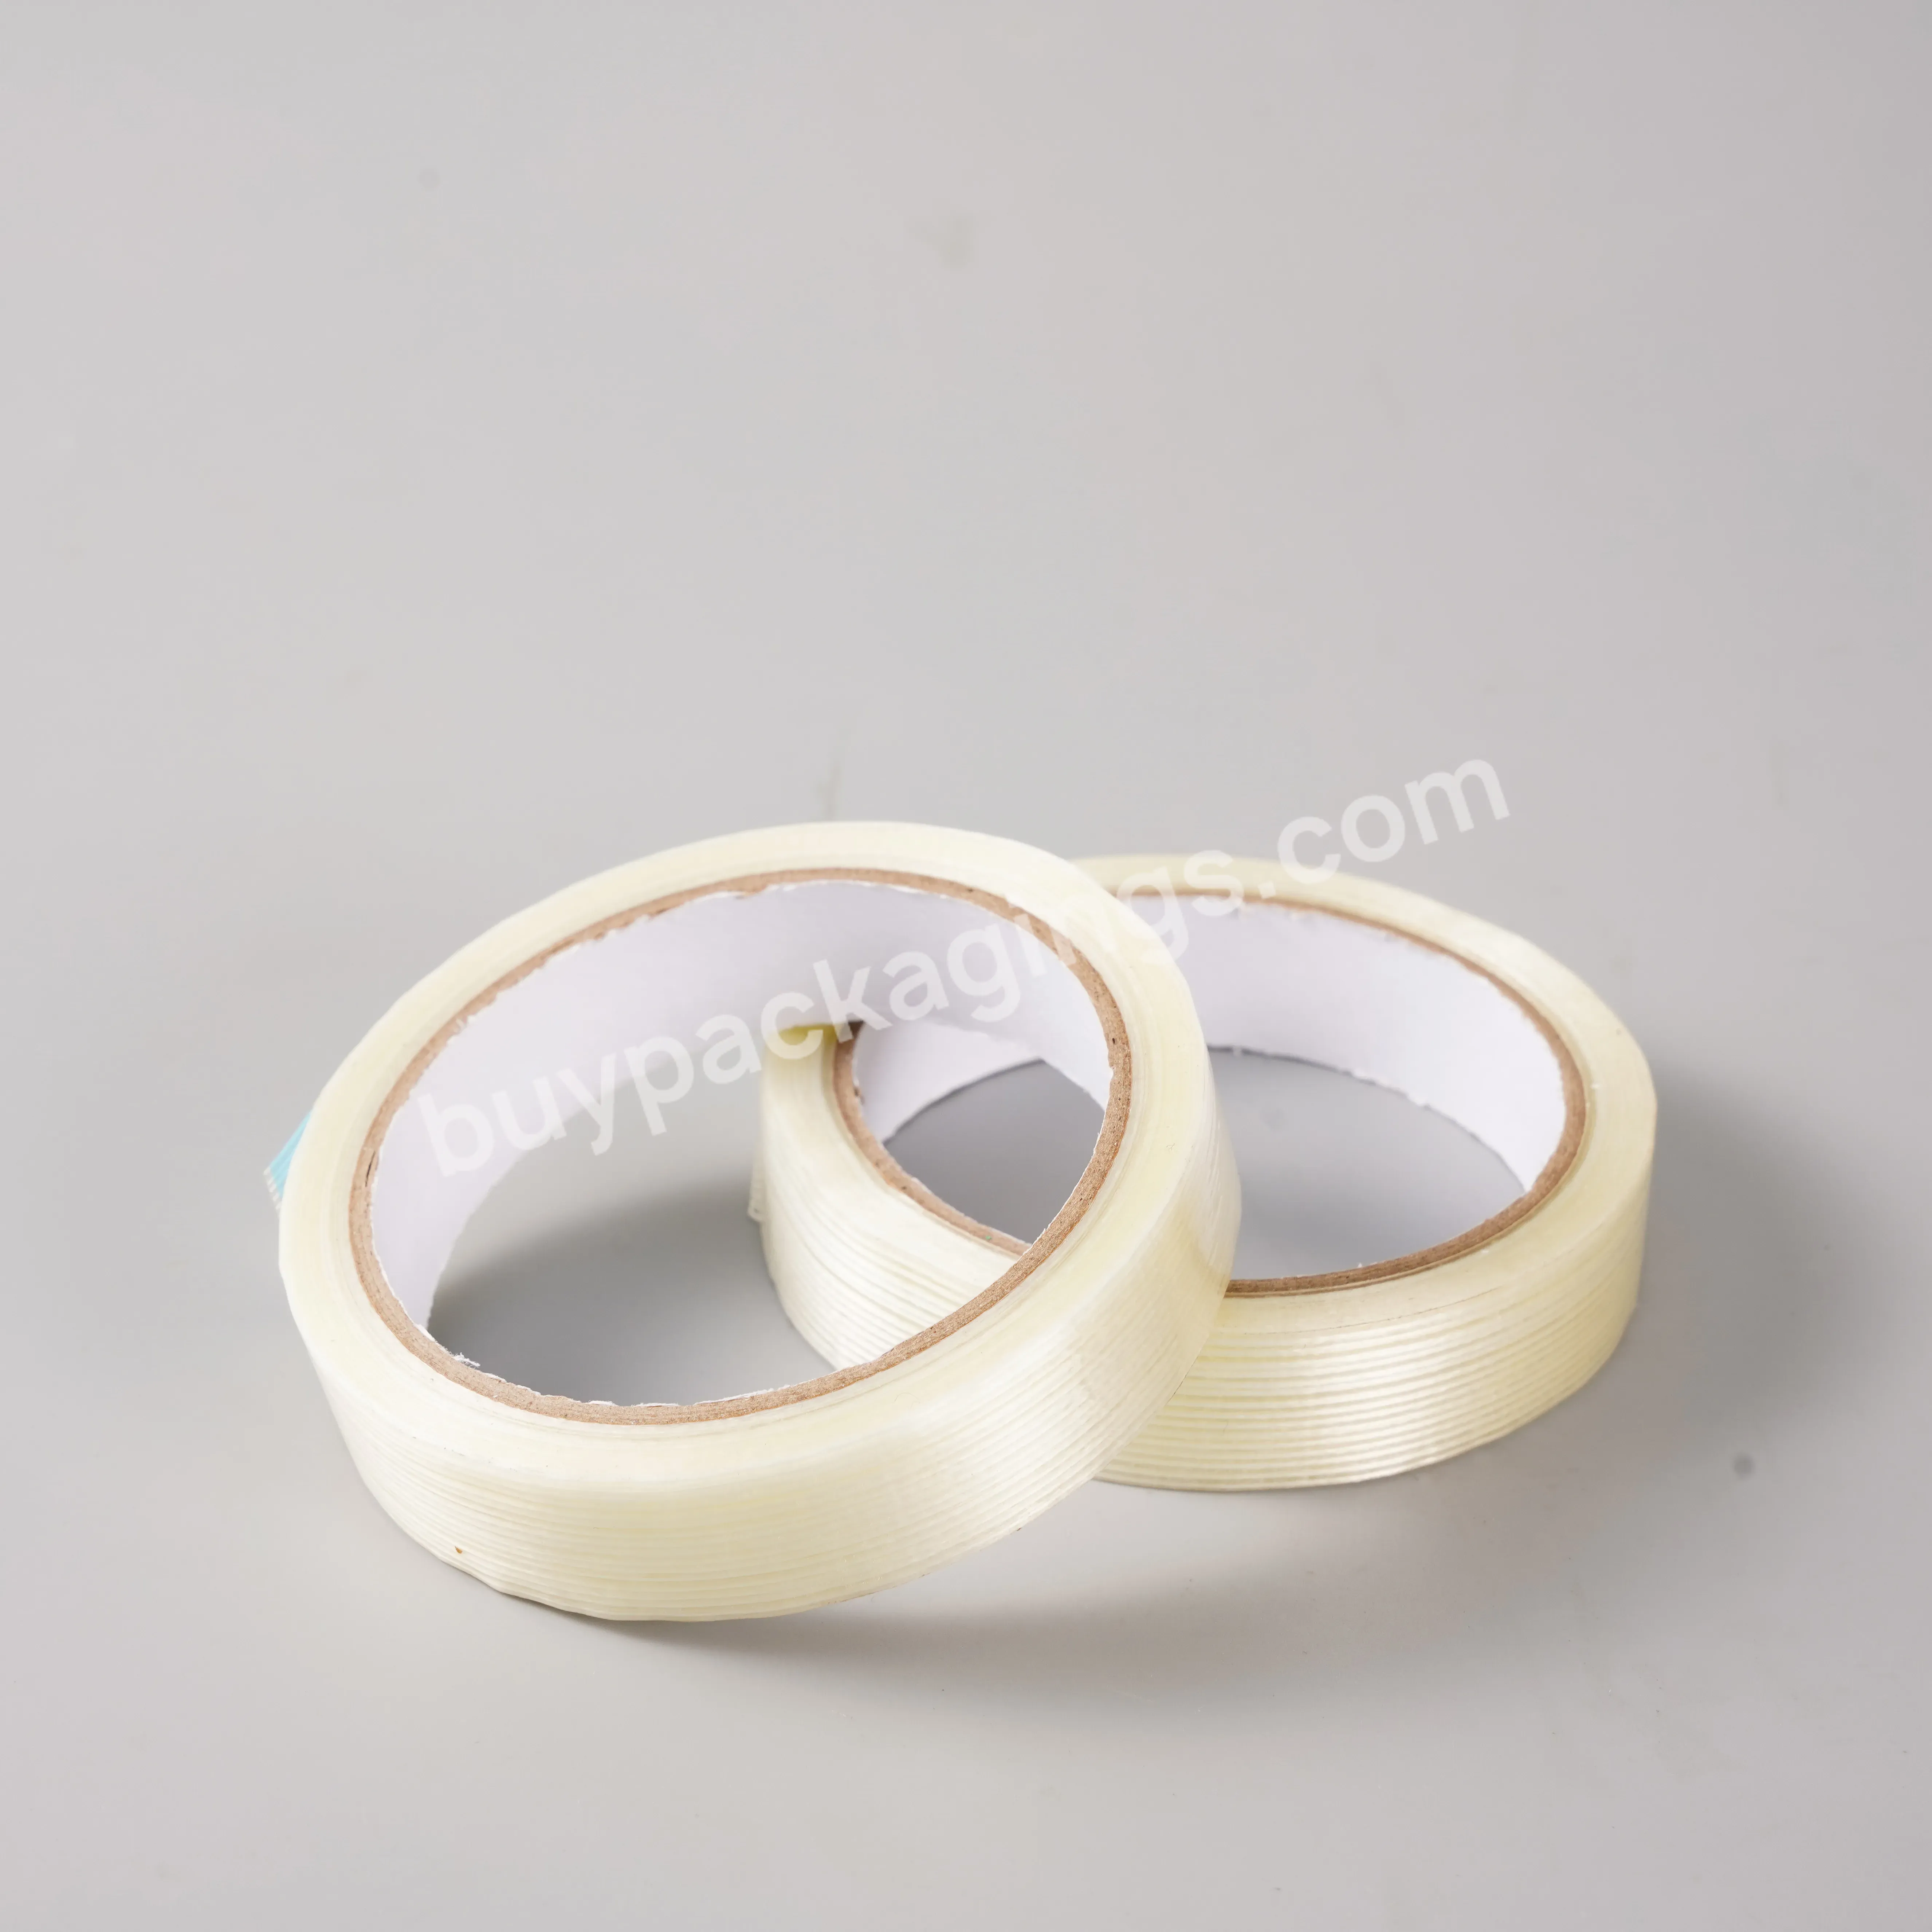 Single Side Glass Fiber Tape Wear-resistant Adhesive Tape - Buy Silicone Electrical Fiber Glass Cloth Tape,Glass Cltoh Silicone Tap,Hotmelt Filament Tape.